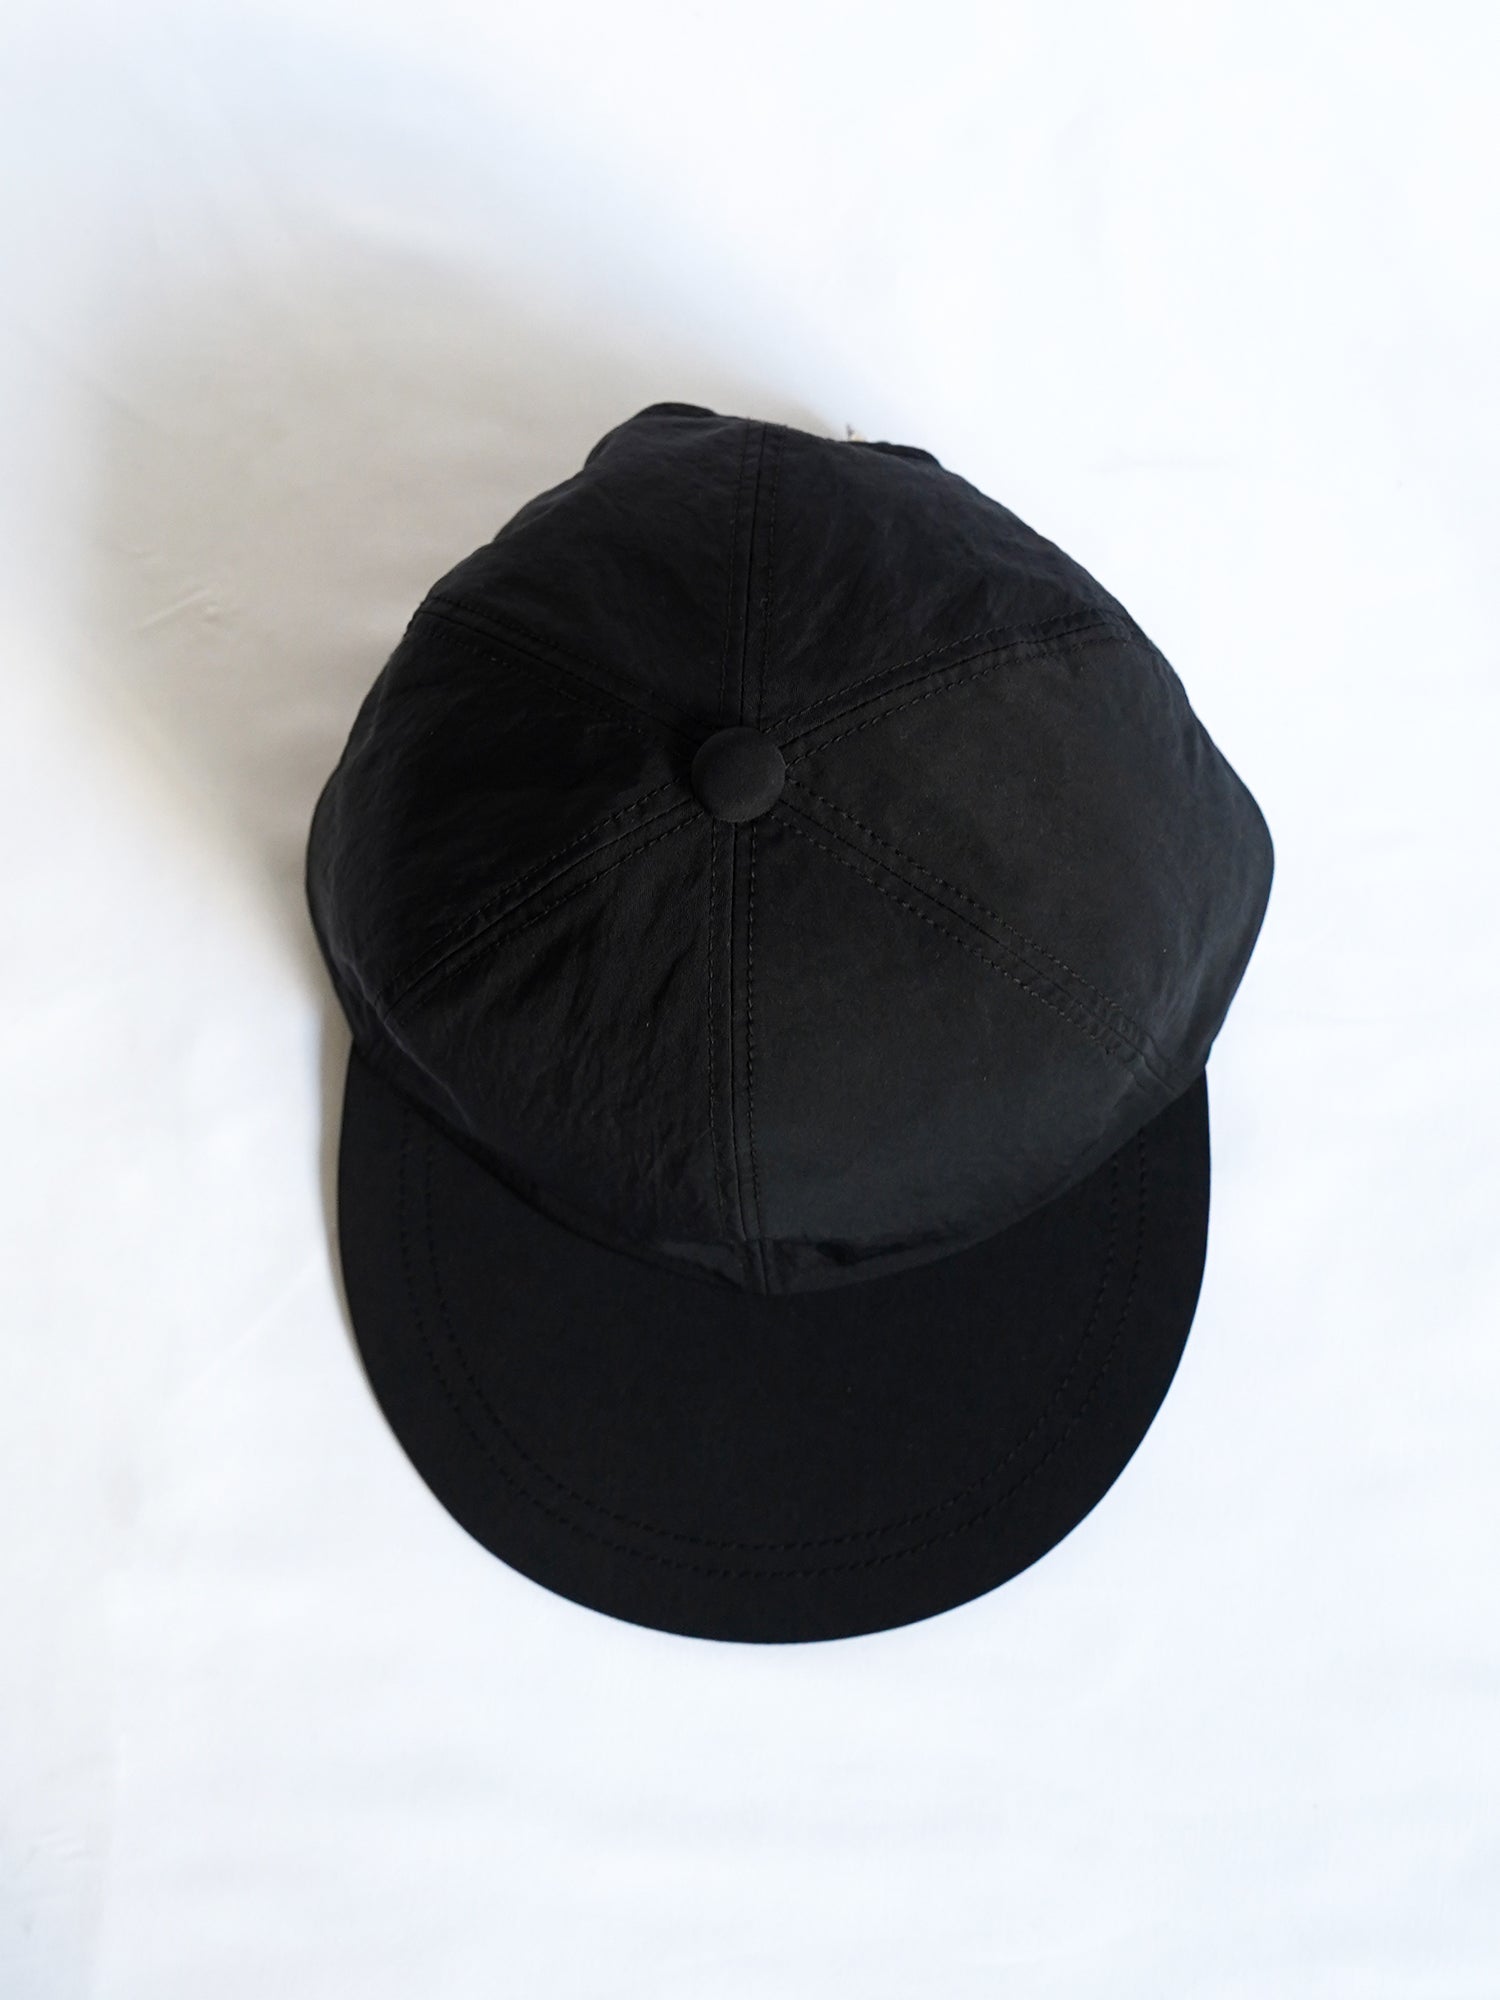 ENDS and MEANS Nylon 6 panel cap - 帽子